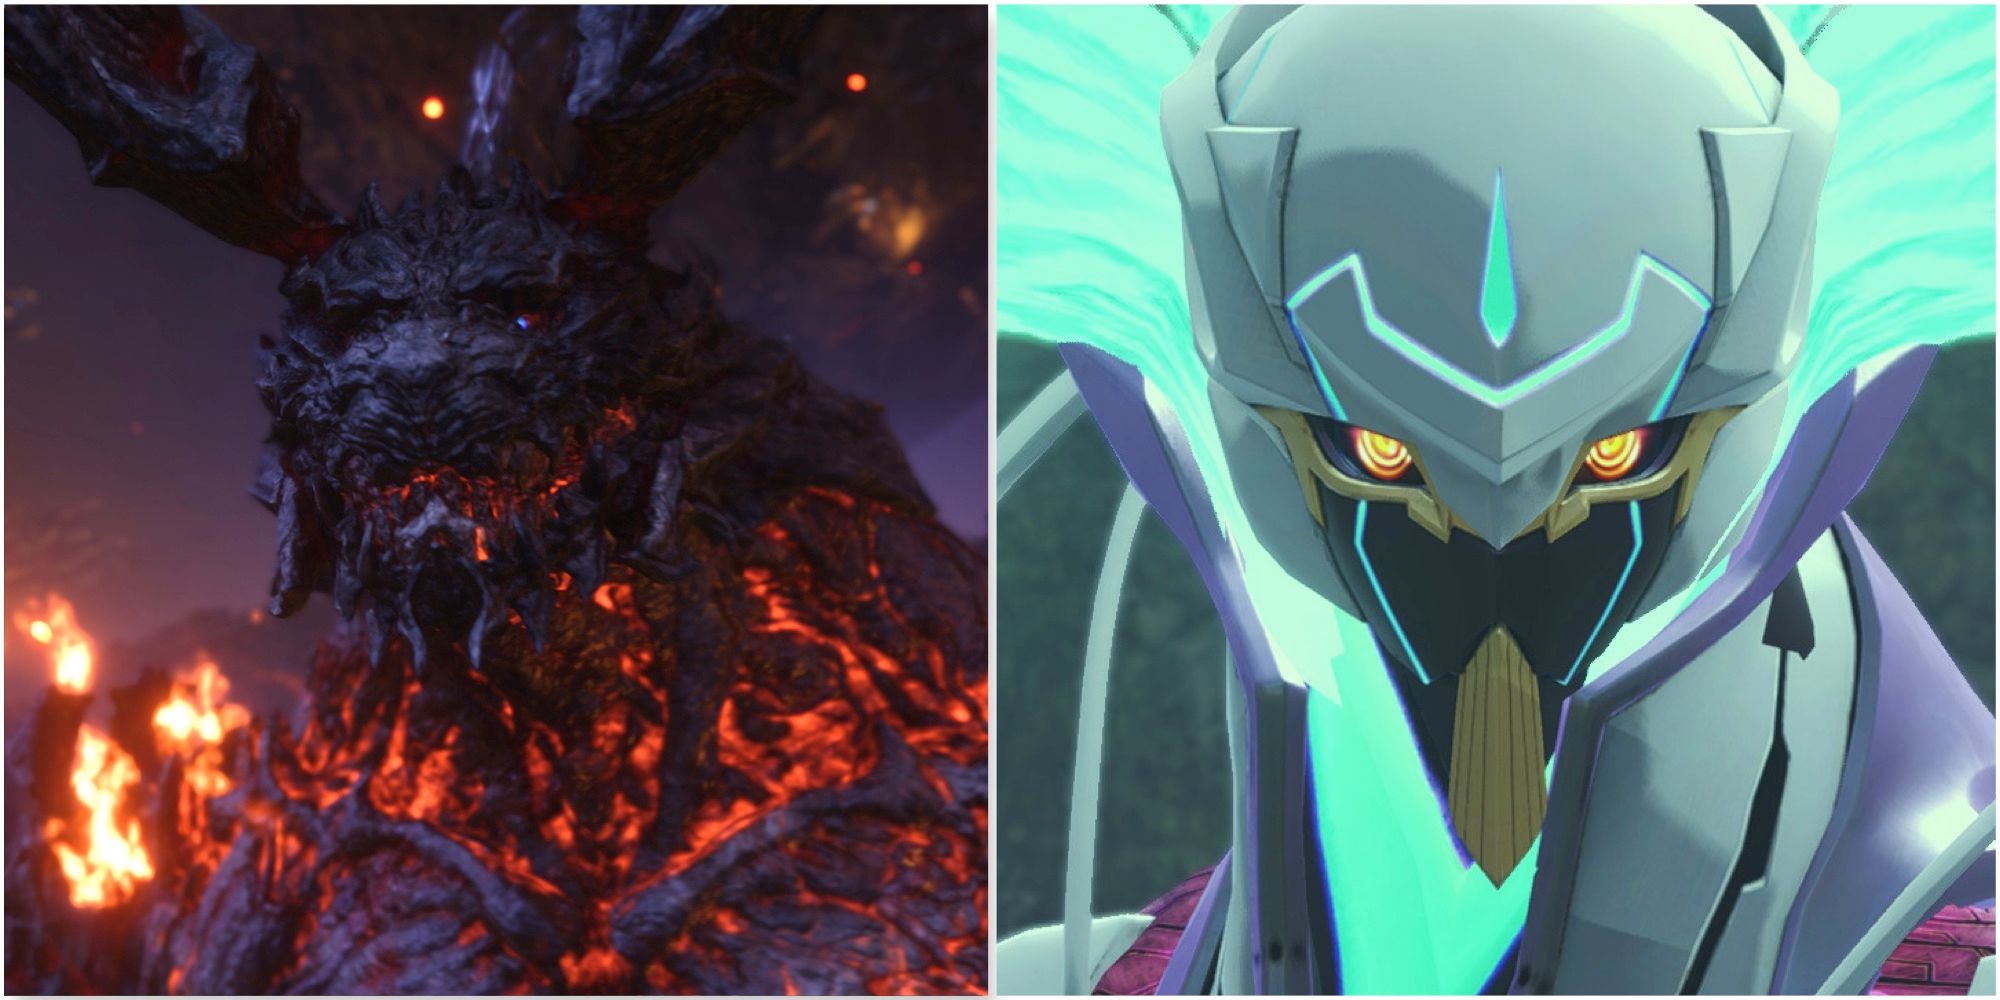 Ifrit in Final Fantasy 16 and An Ouroboros in Xenoblade Chronicles 3